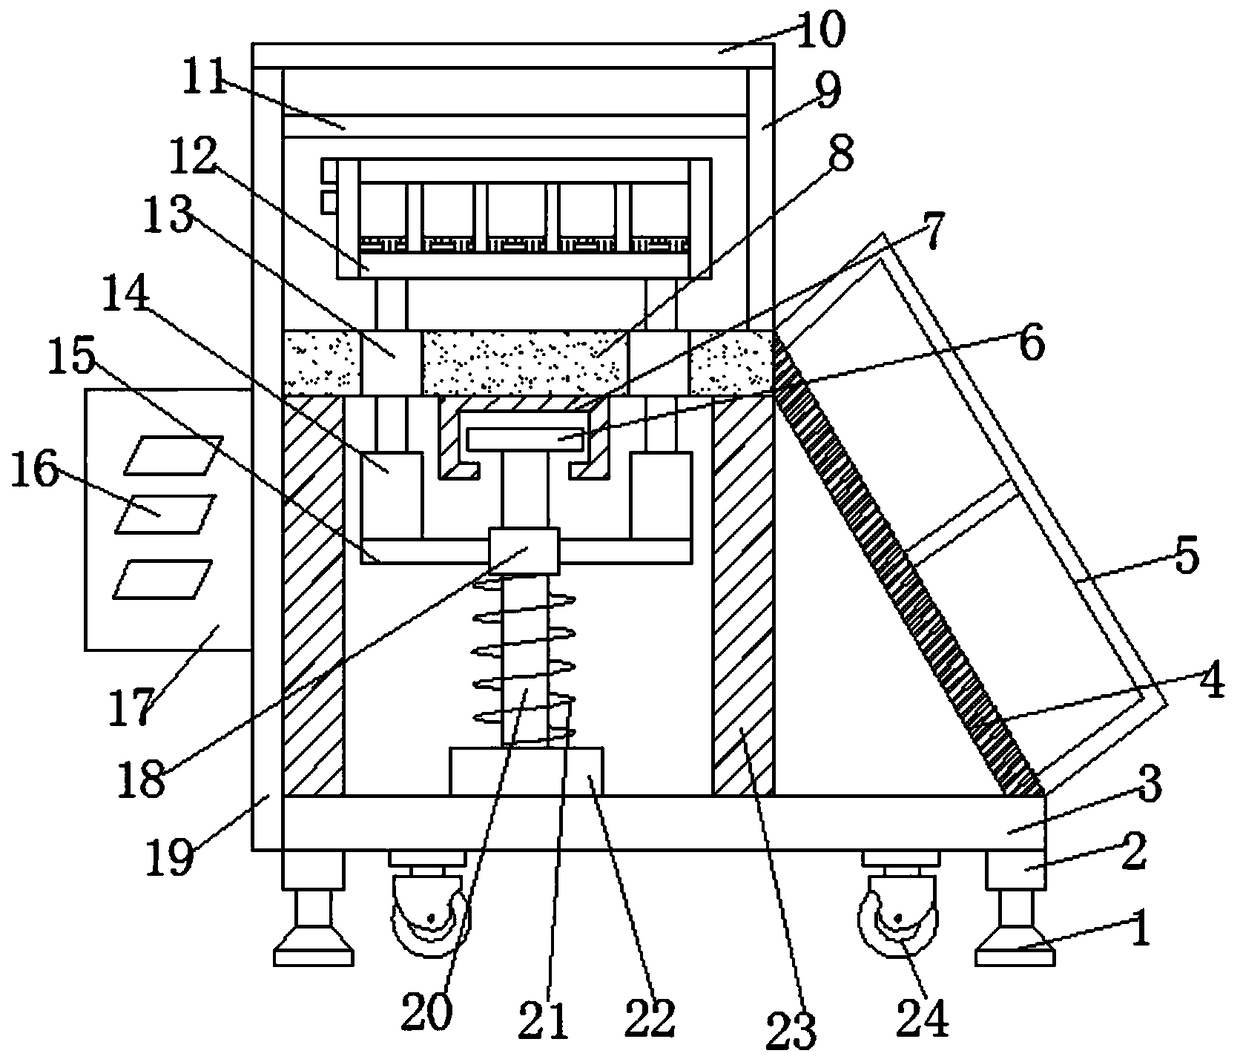 Good-stability height ascending device for electric power projects